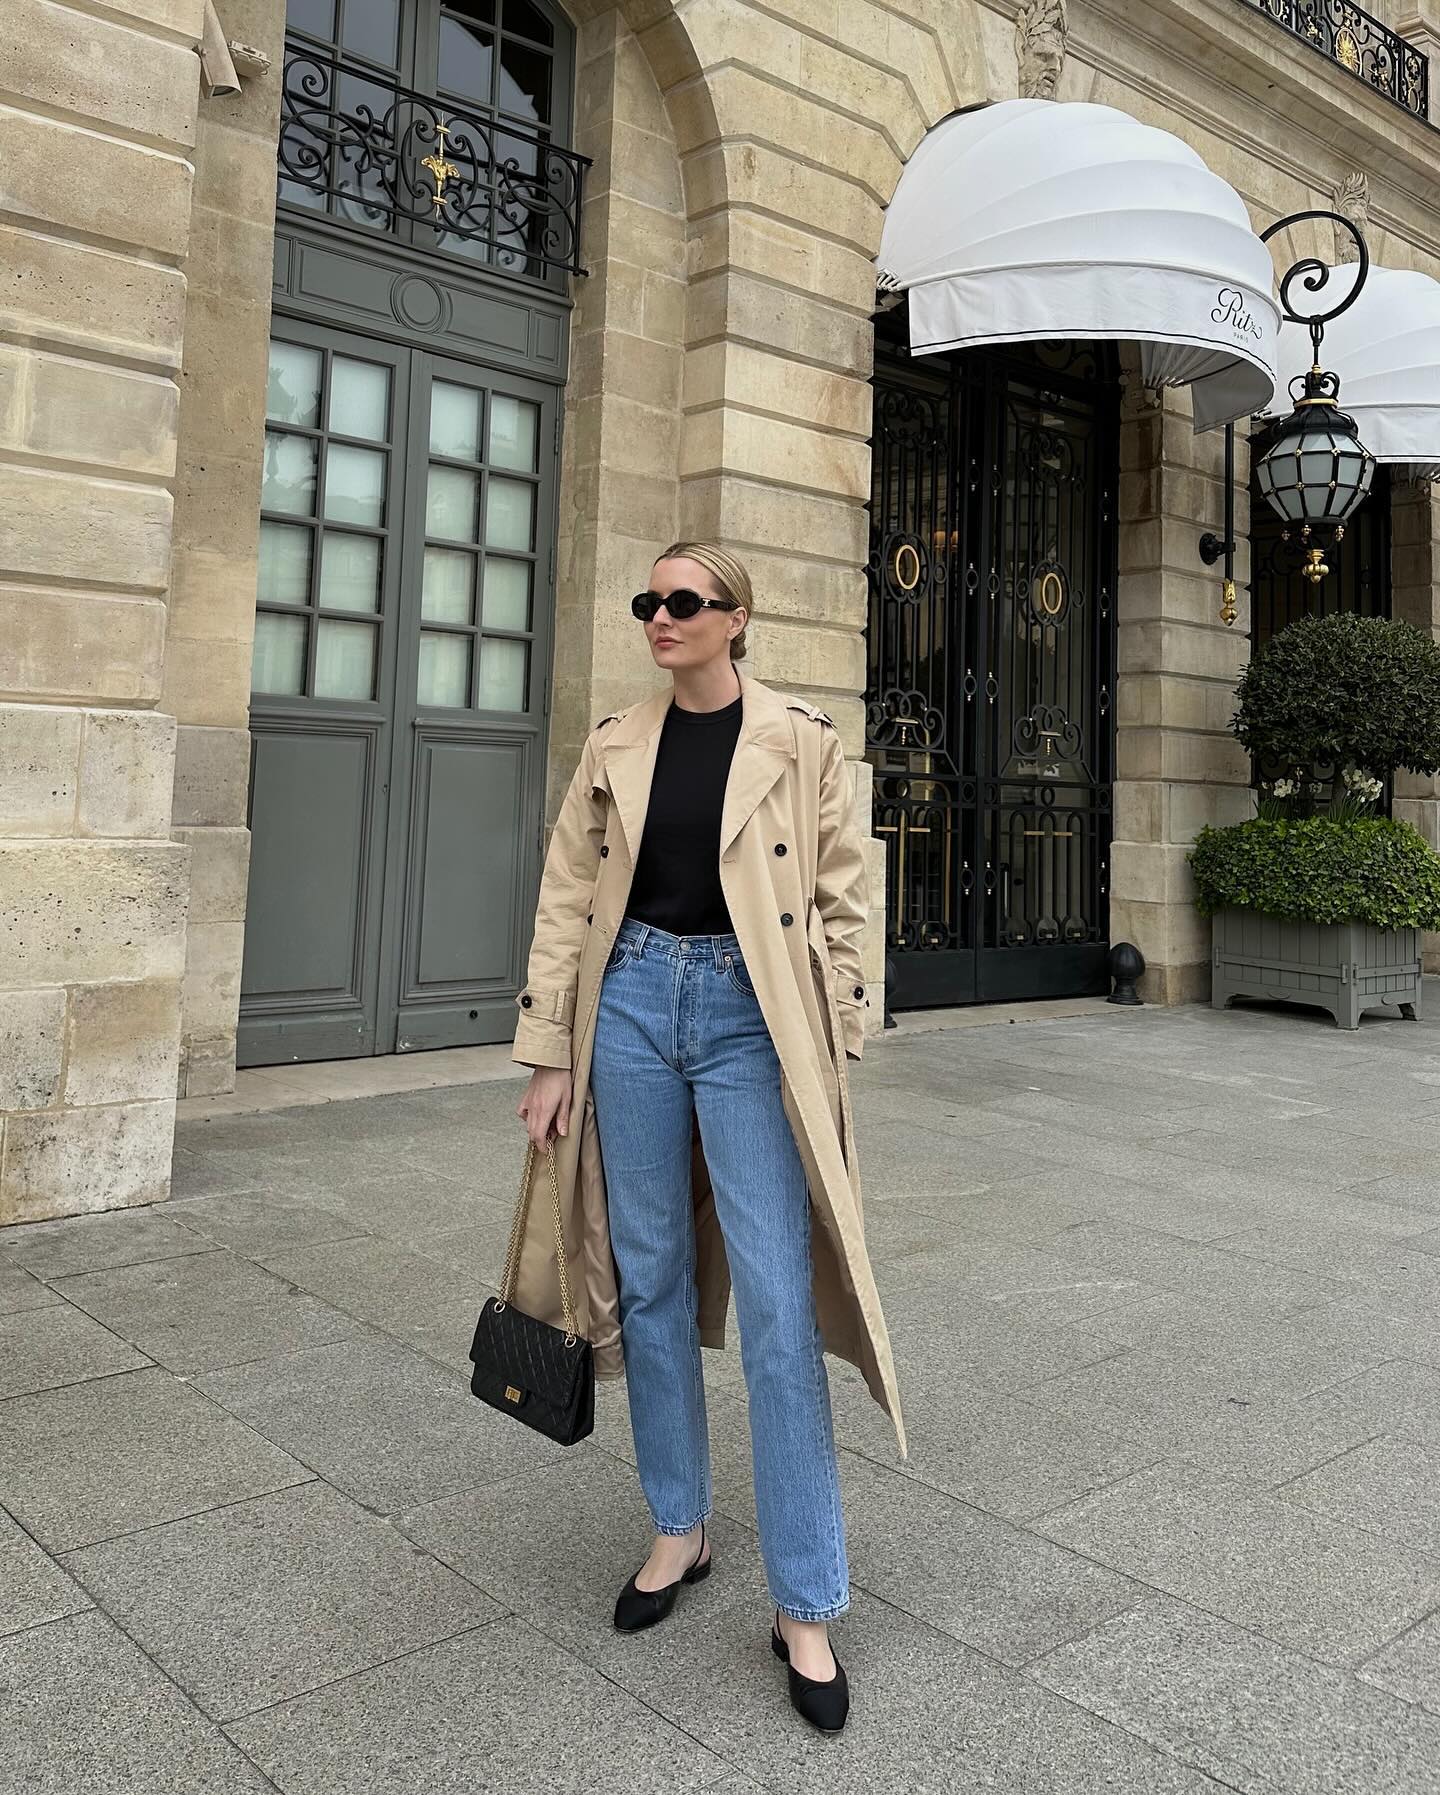 fashion editor Kristen Nichols poses in a stylish outfit on the streets of Paris wearing black oversize oval sunglasses, a trench coat, basic black top, straight-leg jeans, Chanel bag, and black suede slingback flats